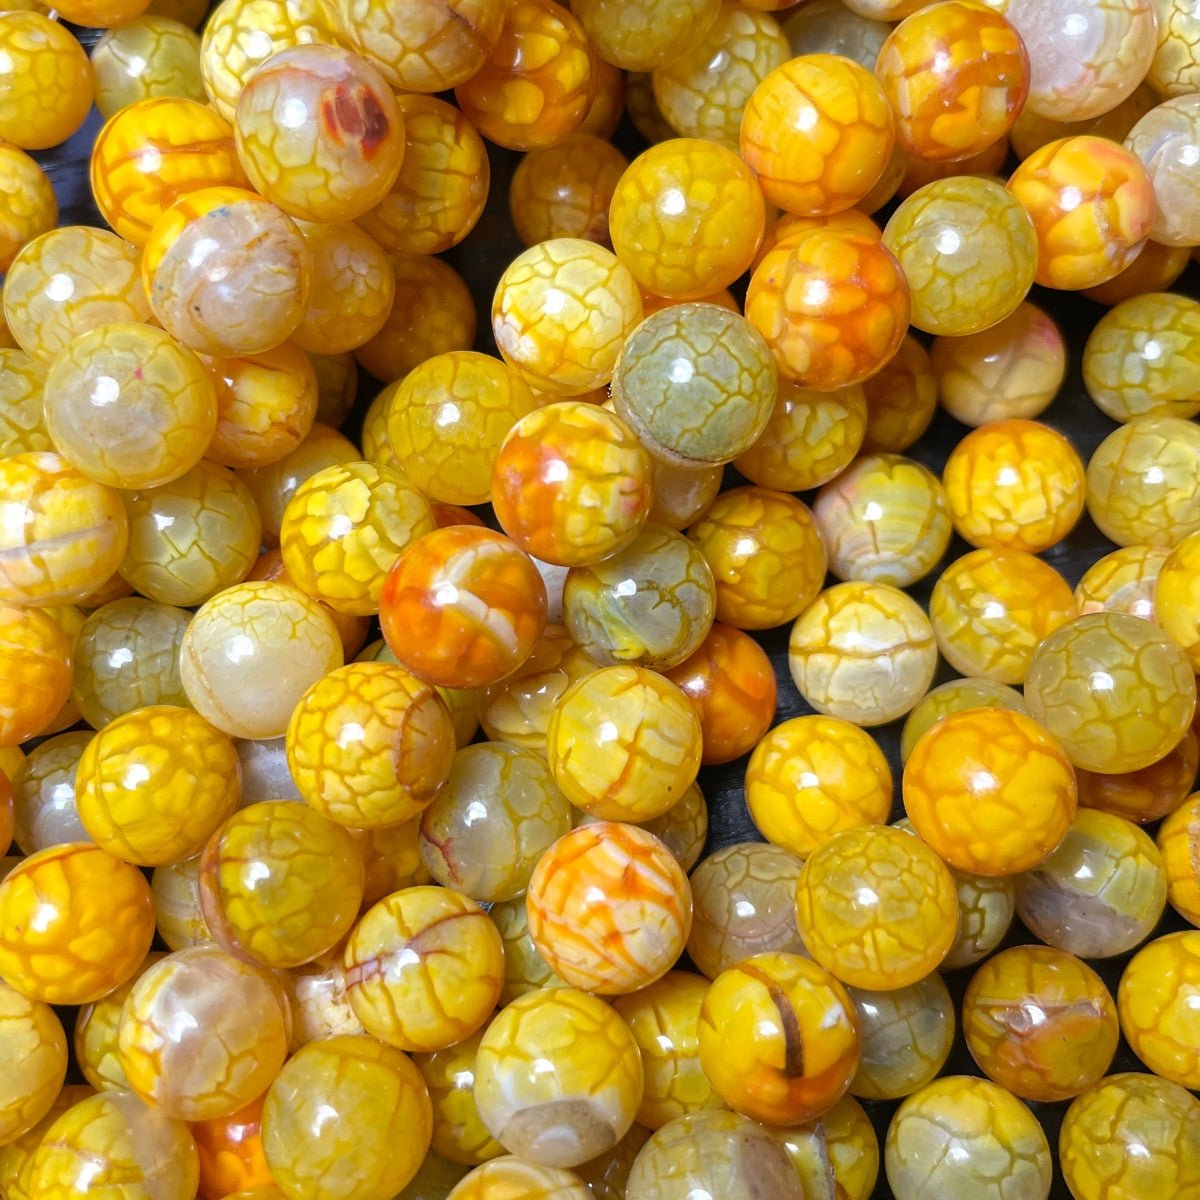 2 Strands/lot 12mm Colorful Cracked Fire Agate Round Stone Beads Yellow Stone Beads New Beads Arrivals Round Agate Beads Charms Beads Beyond